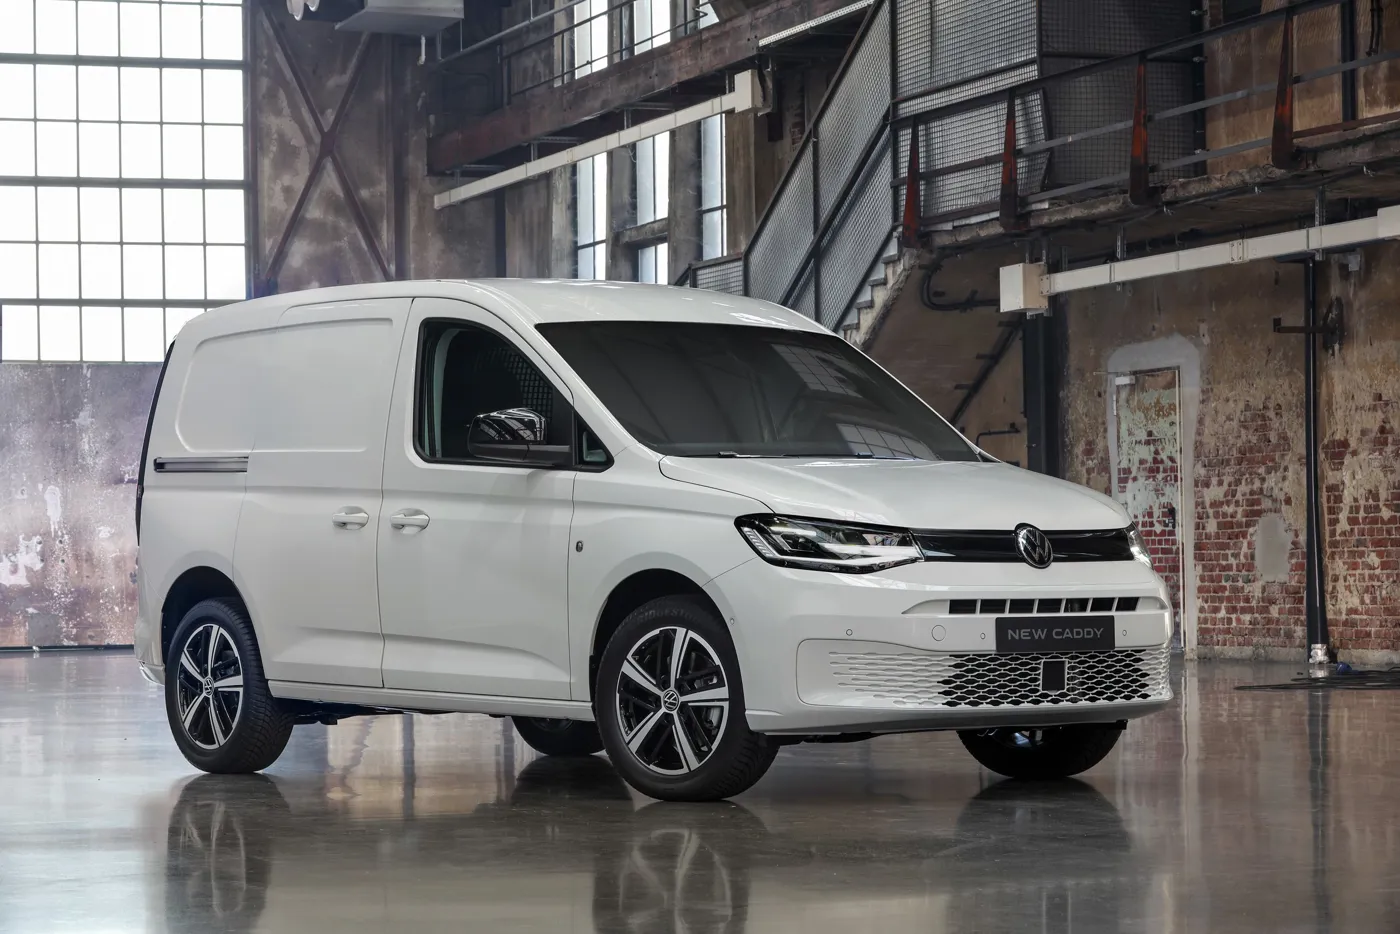 VW reveals all-new Caddy